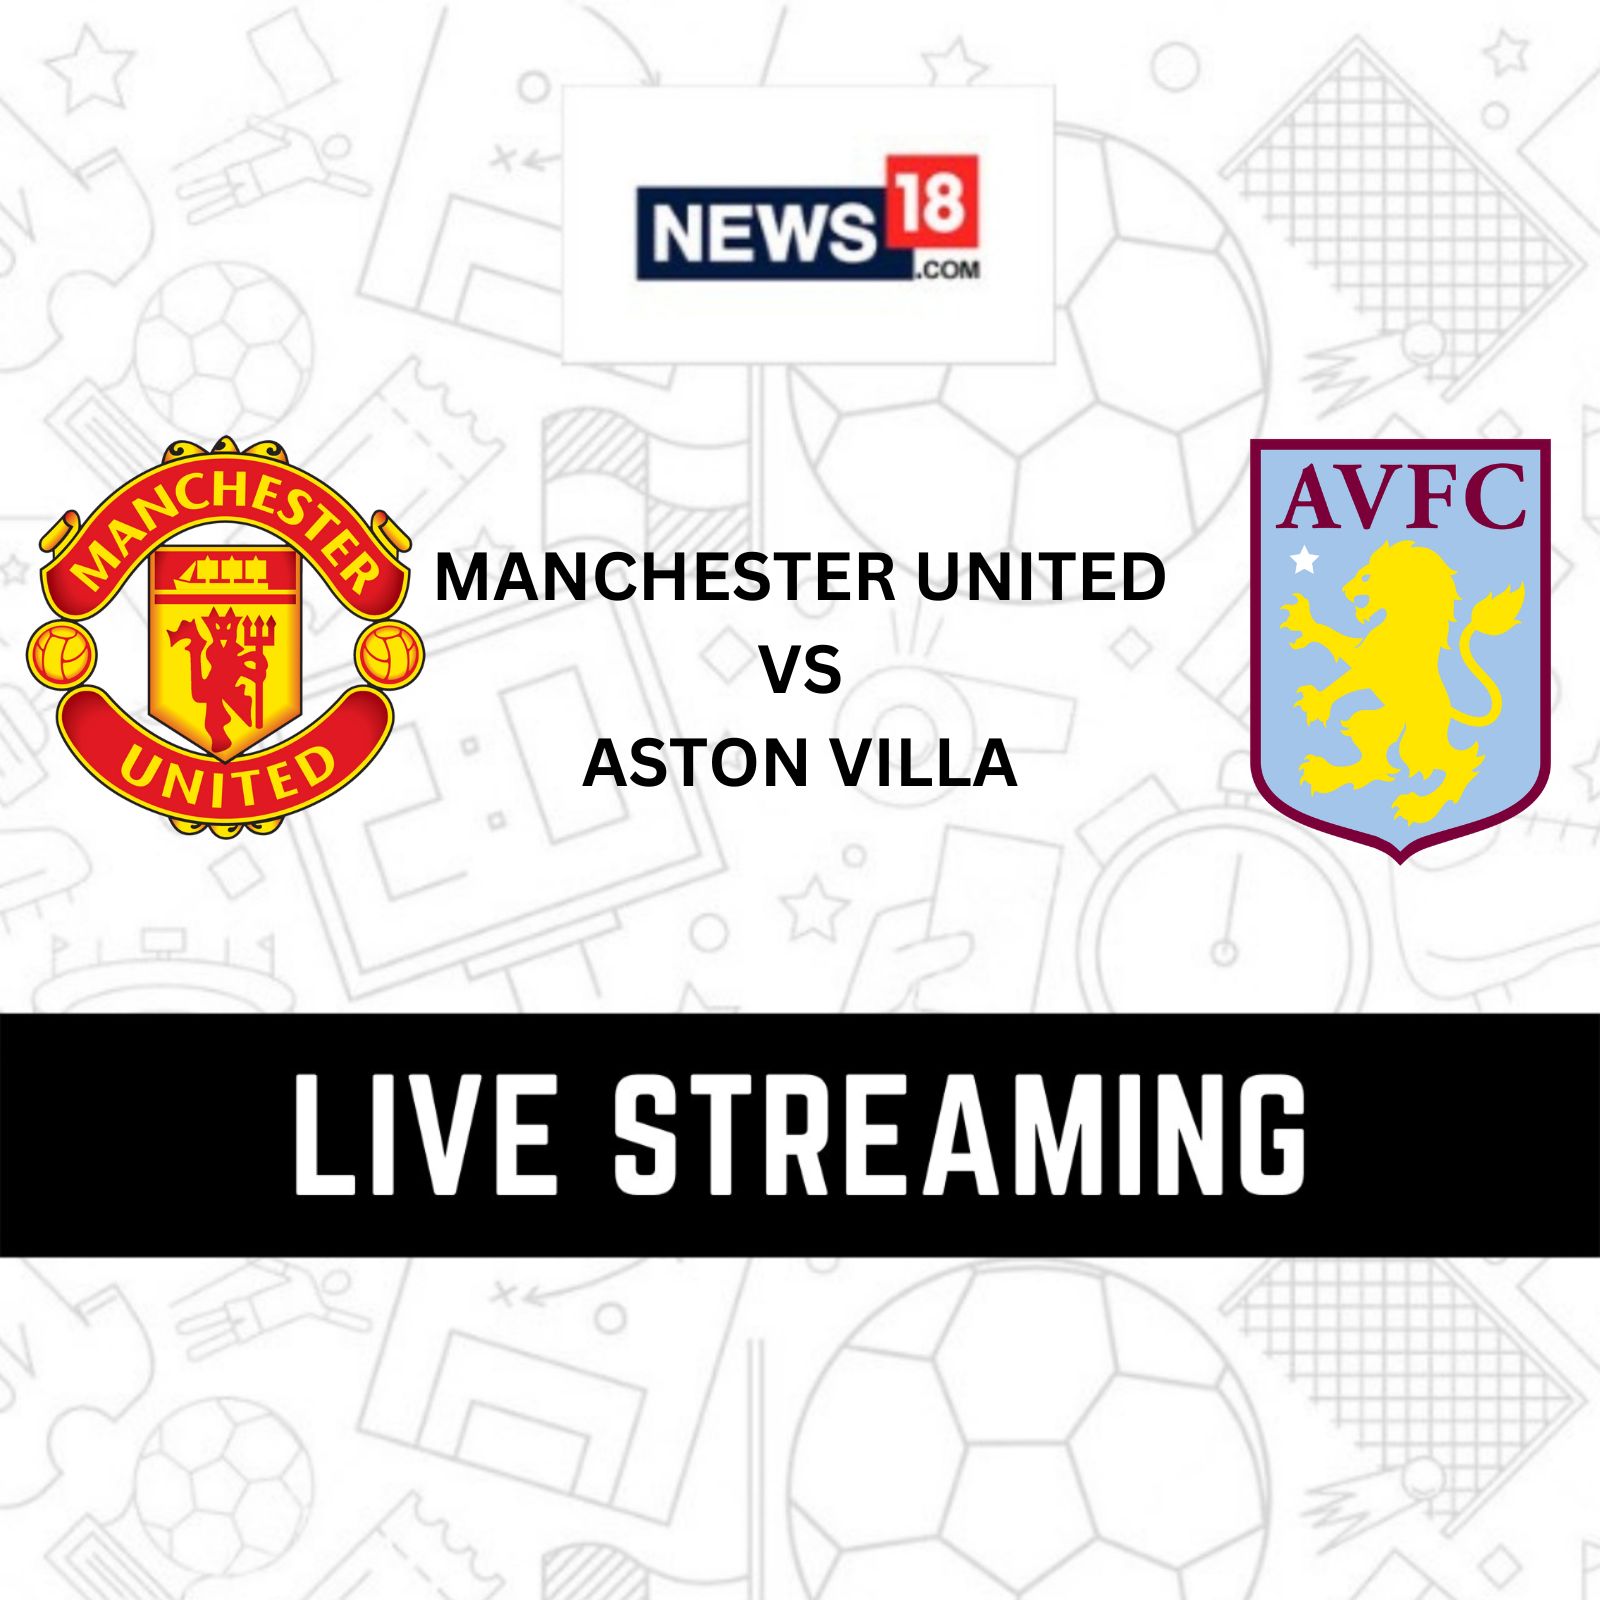 Manchester United vs Aston Villa EFL Cup Live Streaming When and Where to watch Manchester United vs Aston Villa Match Live?